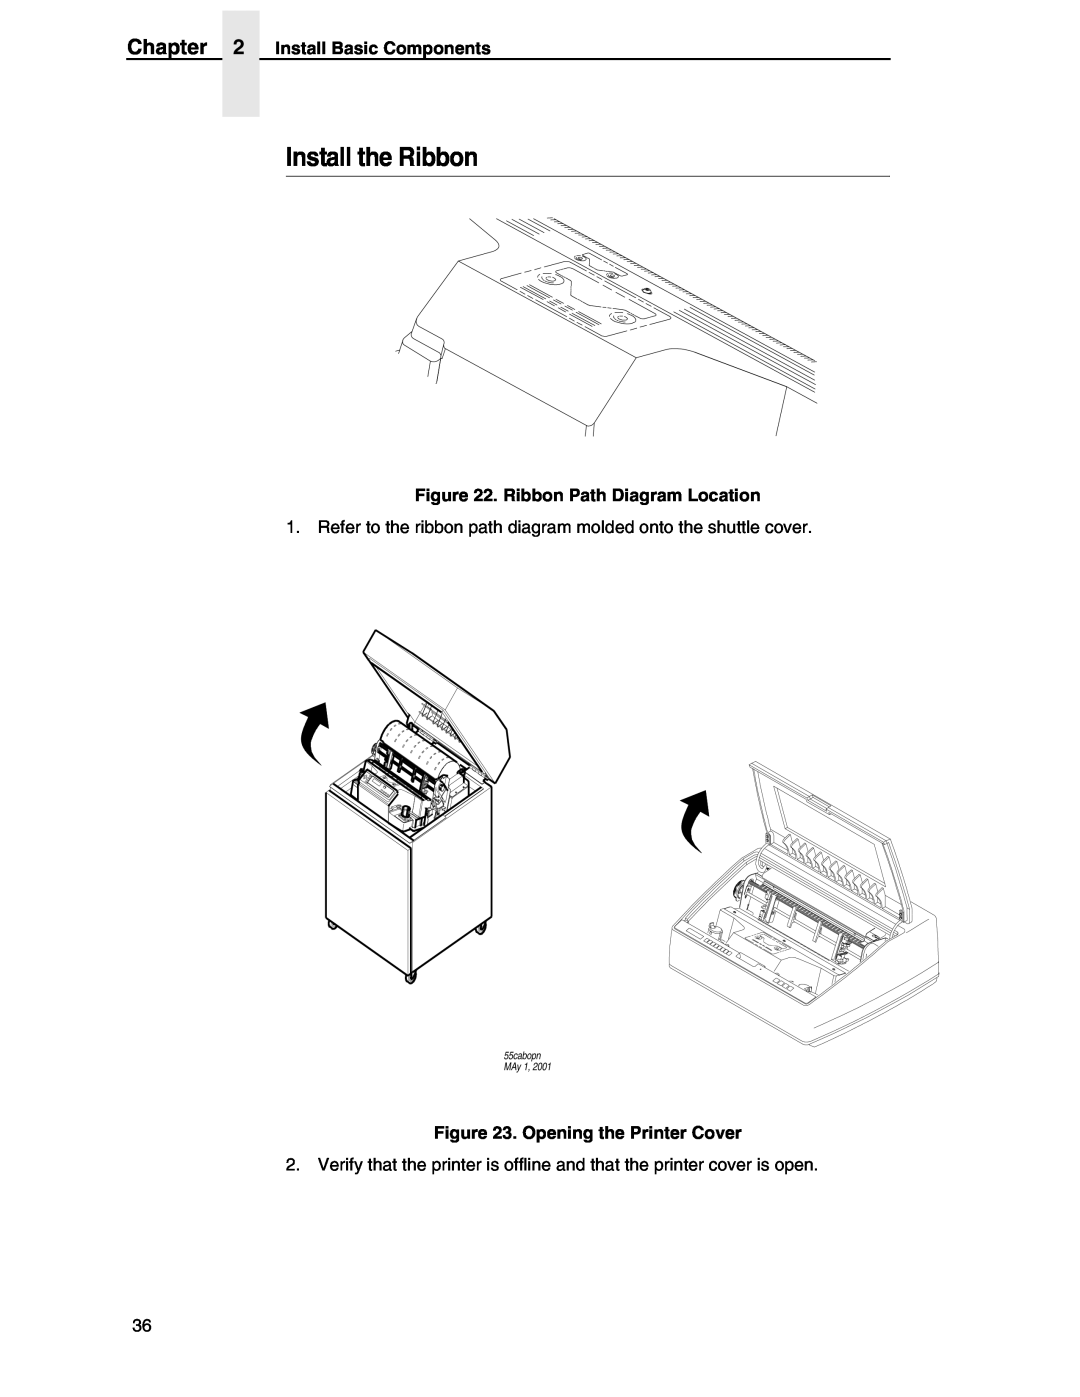 Compaq P5000 Series Install the Ribbon, Ribbon Path Diagram Location, Opening the Printer Cover, Install Basic Components 